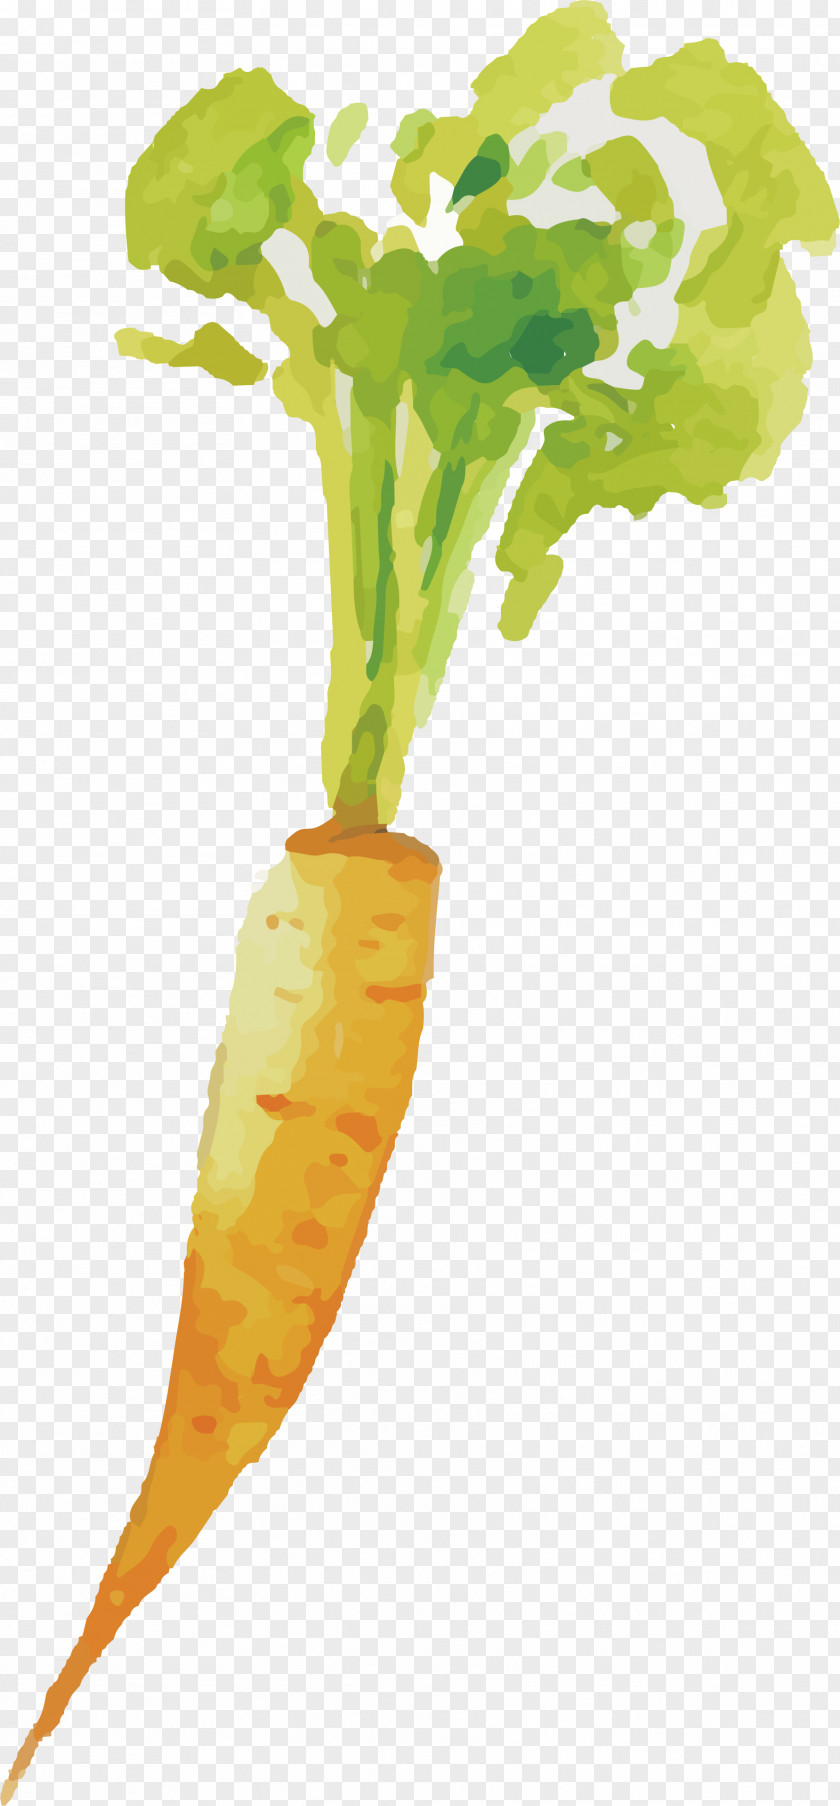 Painted Carrot Vegetable PNG